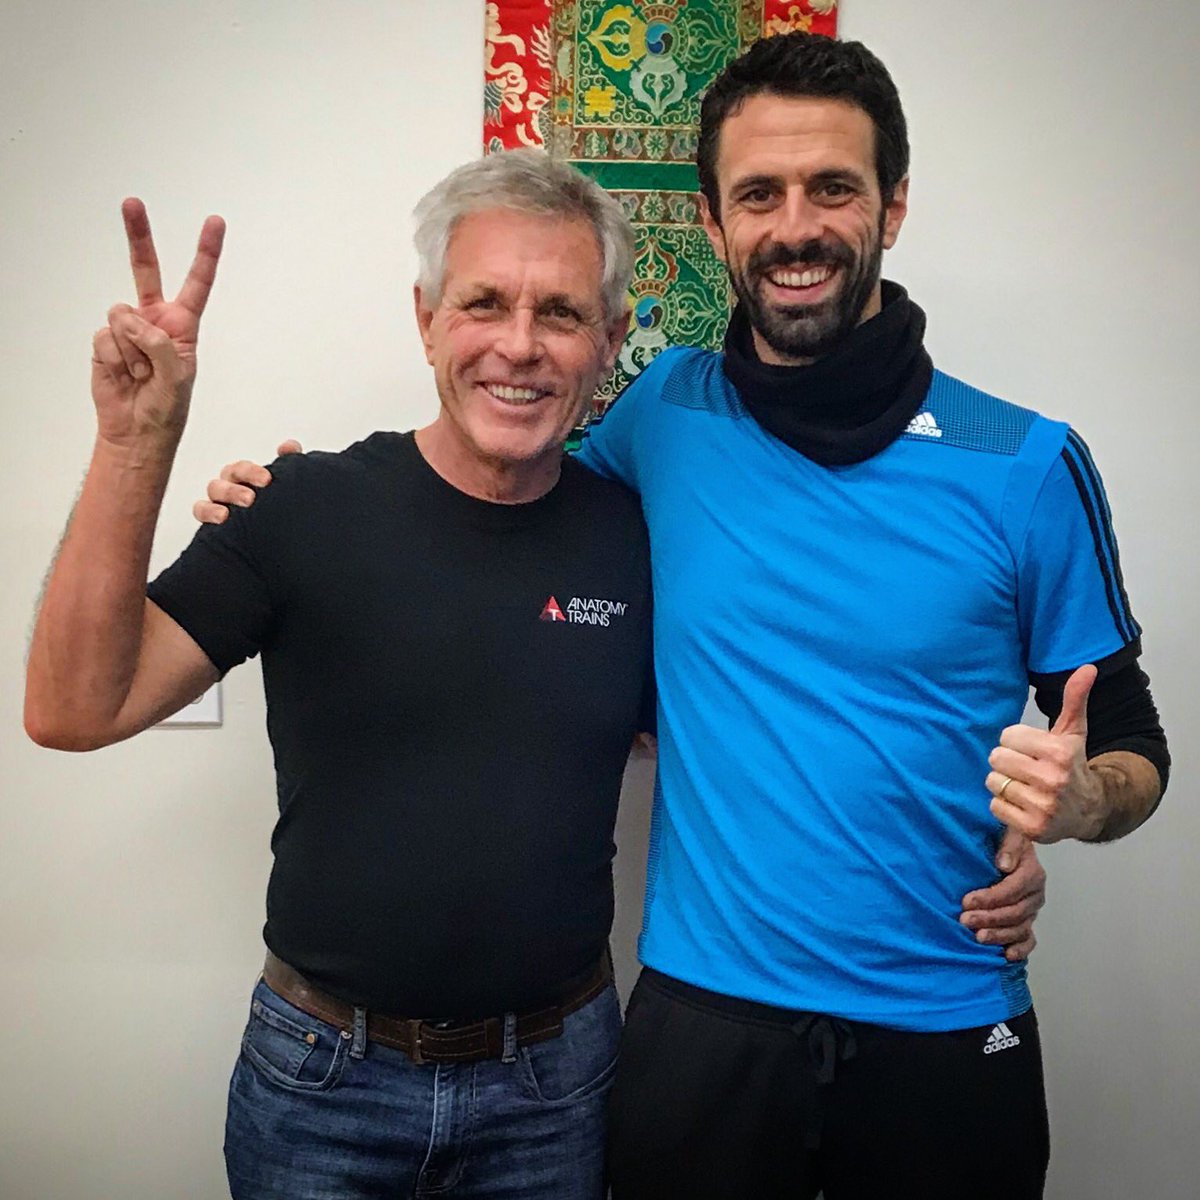 Meeting Tom Myers in person is per se a privilege.But what happened last week in Boulder CO is a little dream come true:he accepted to be part of my graduate thesis in #osteopathy!This man is a real source of inspiration.Excited and grateful for this precious gift. @anatomytrains